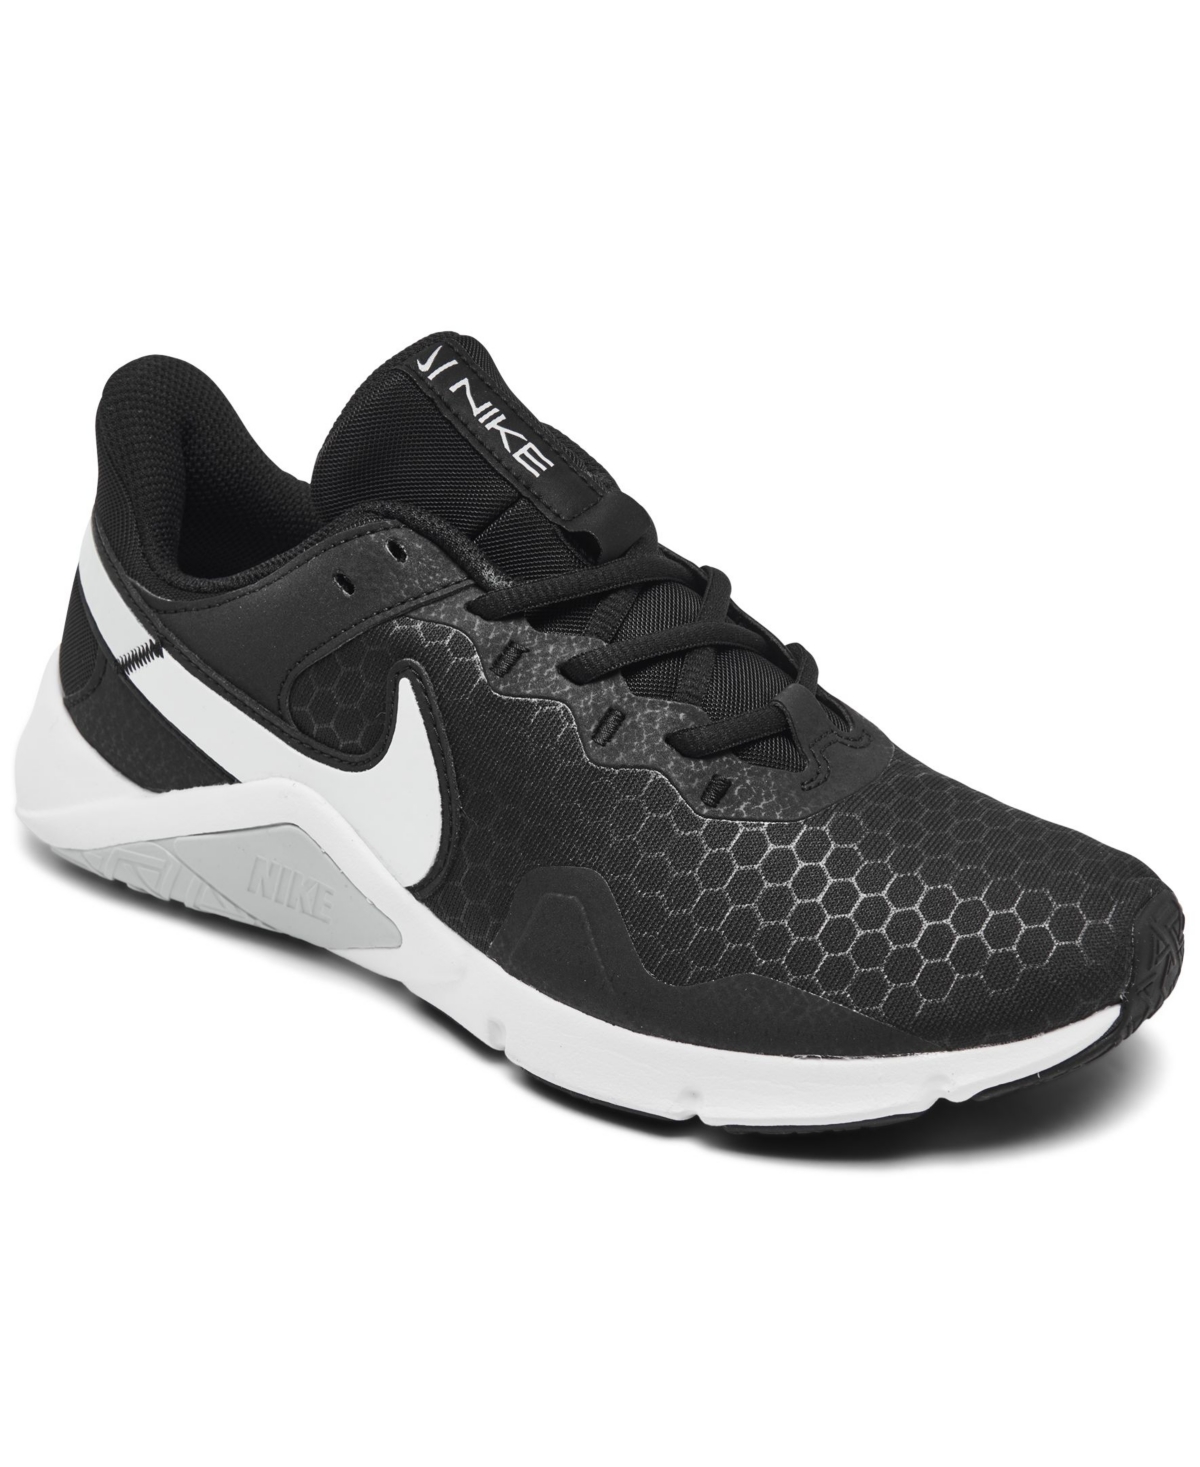 Women's Legend Essential 2 Training Sneakers from Finish Line - Black, White